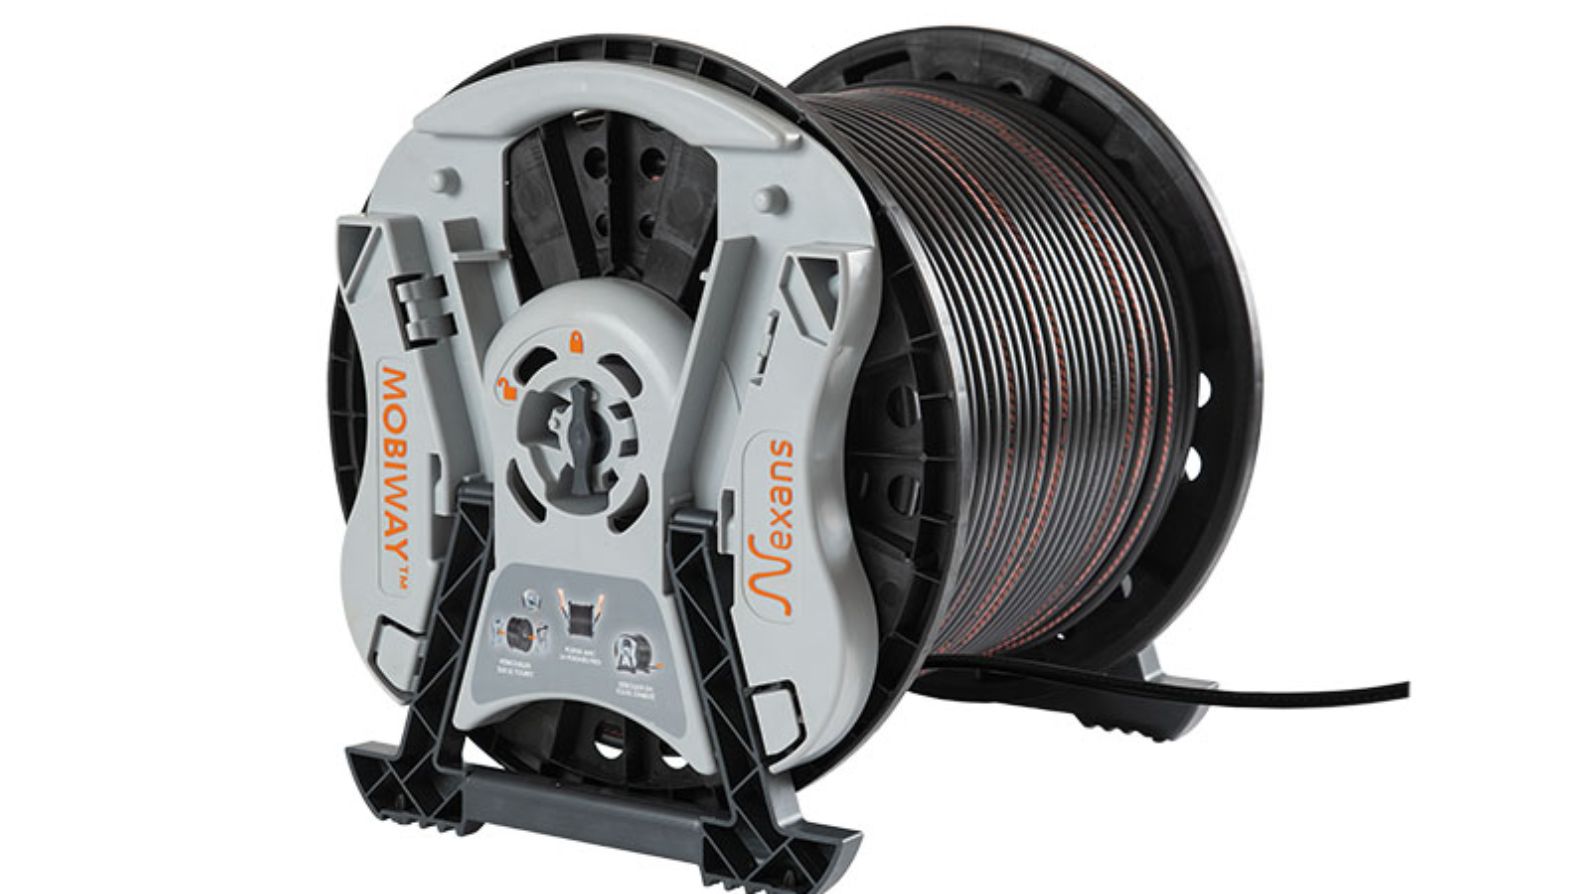 MOBIWAY™ BY NEXANS - Reusable system allowing for easy carrying and unwinding of your cable drums